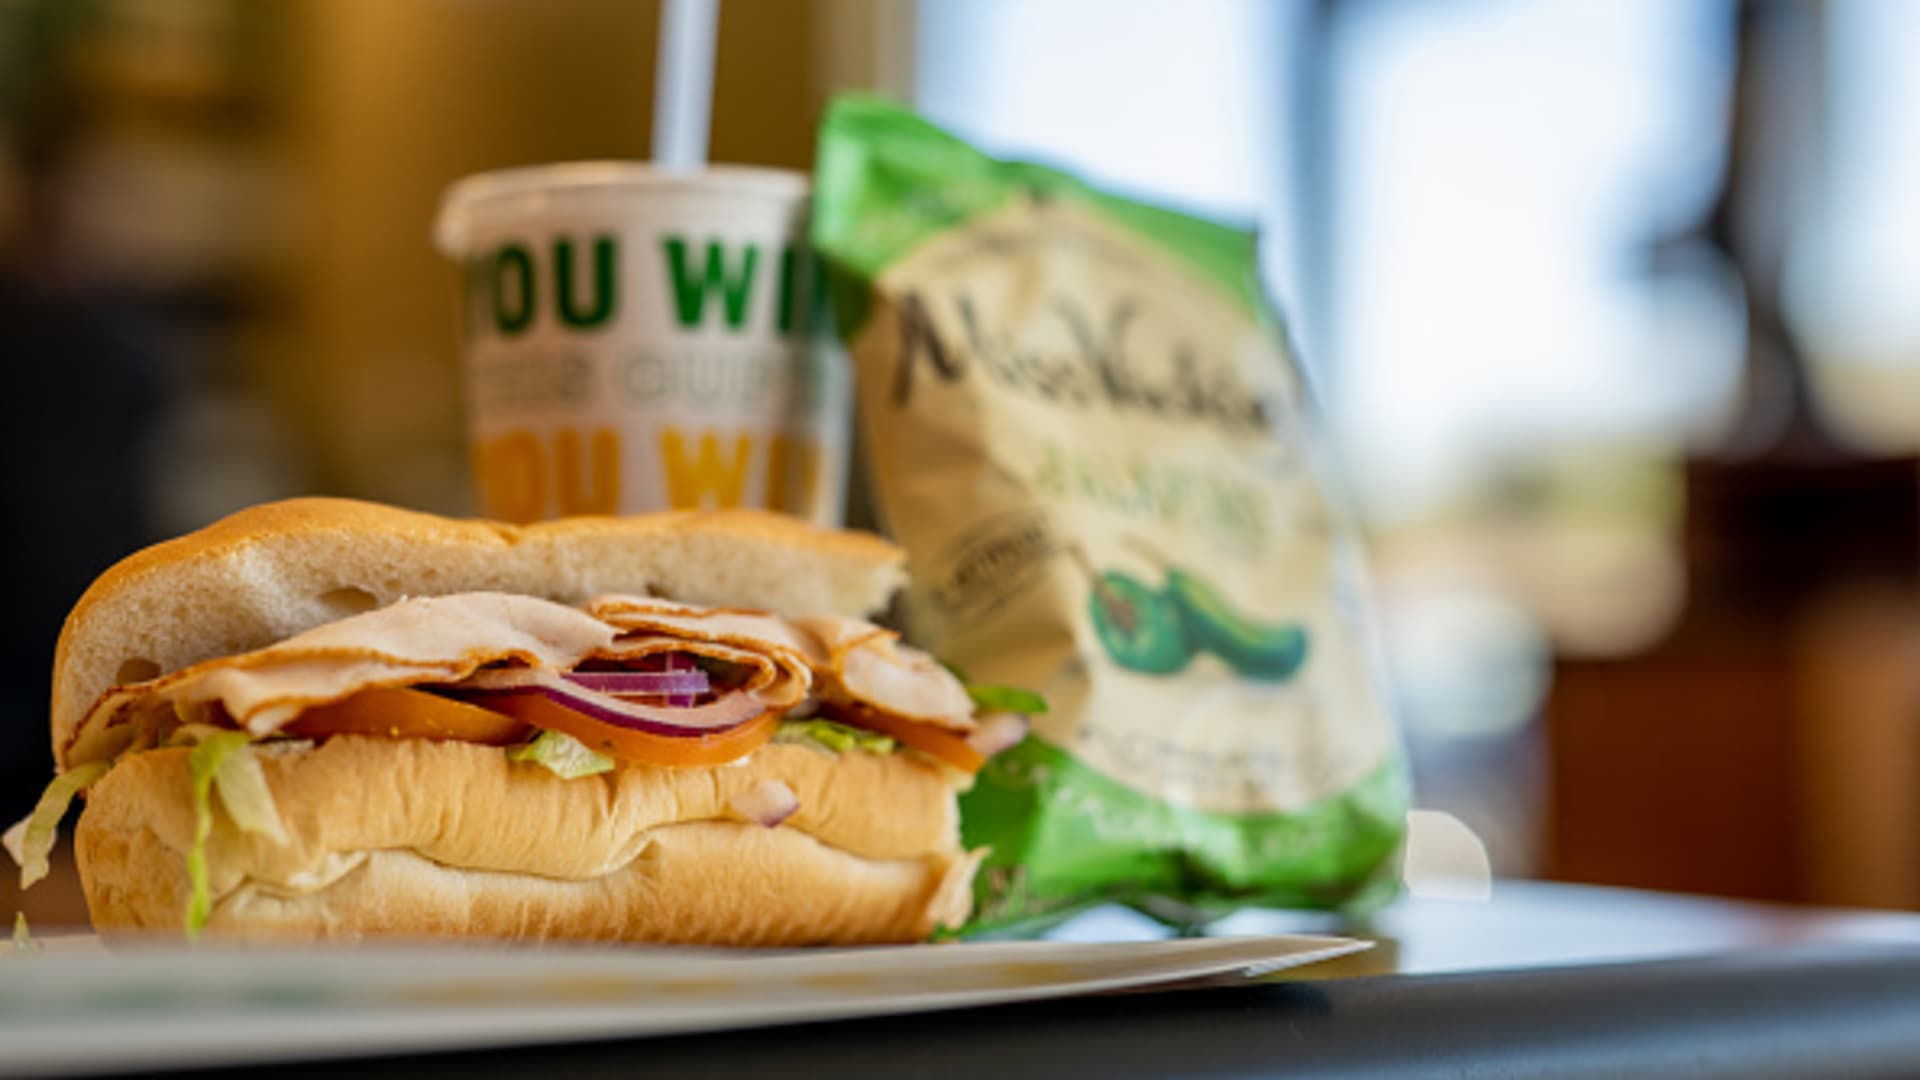 Subway Starts 2022 with Two New Sandwiches - QSR Magazine